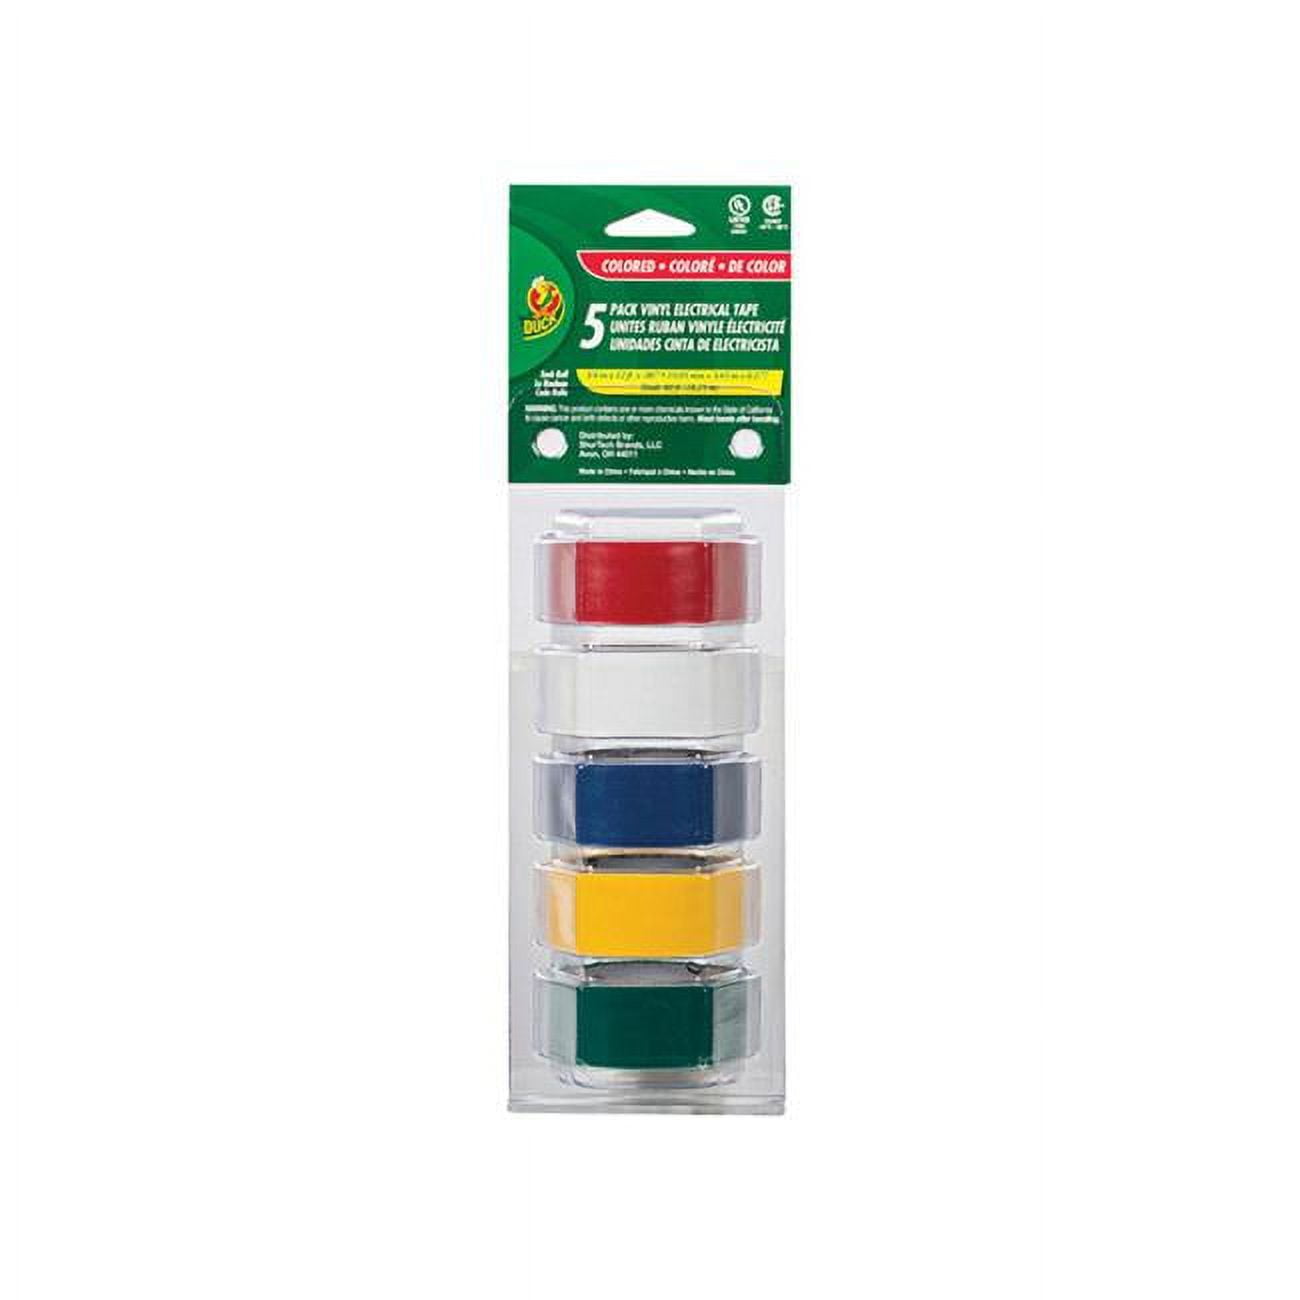 JVCC E-Tape Colored Electrical Tape [7 mils thick]: 3/4 in. x 66 ft.  (Orange)